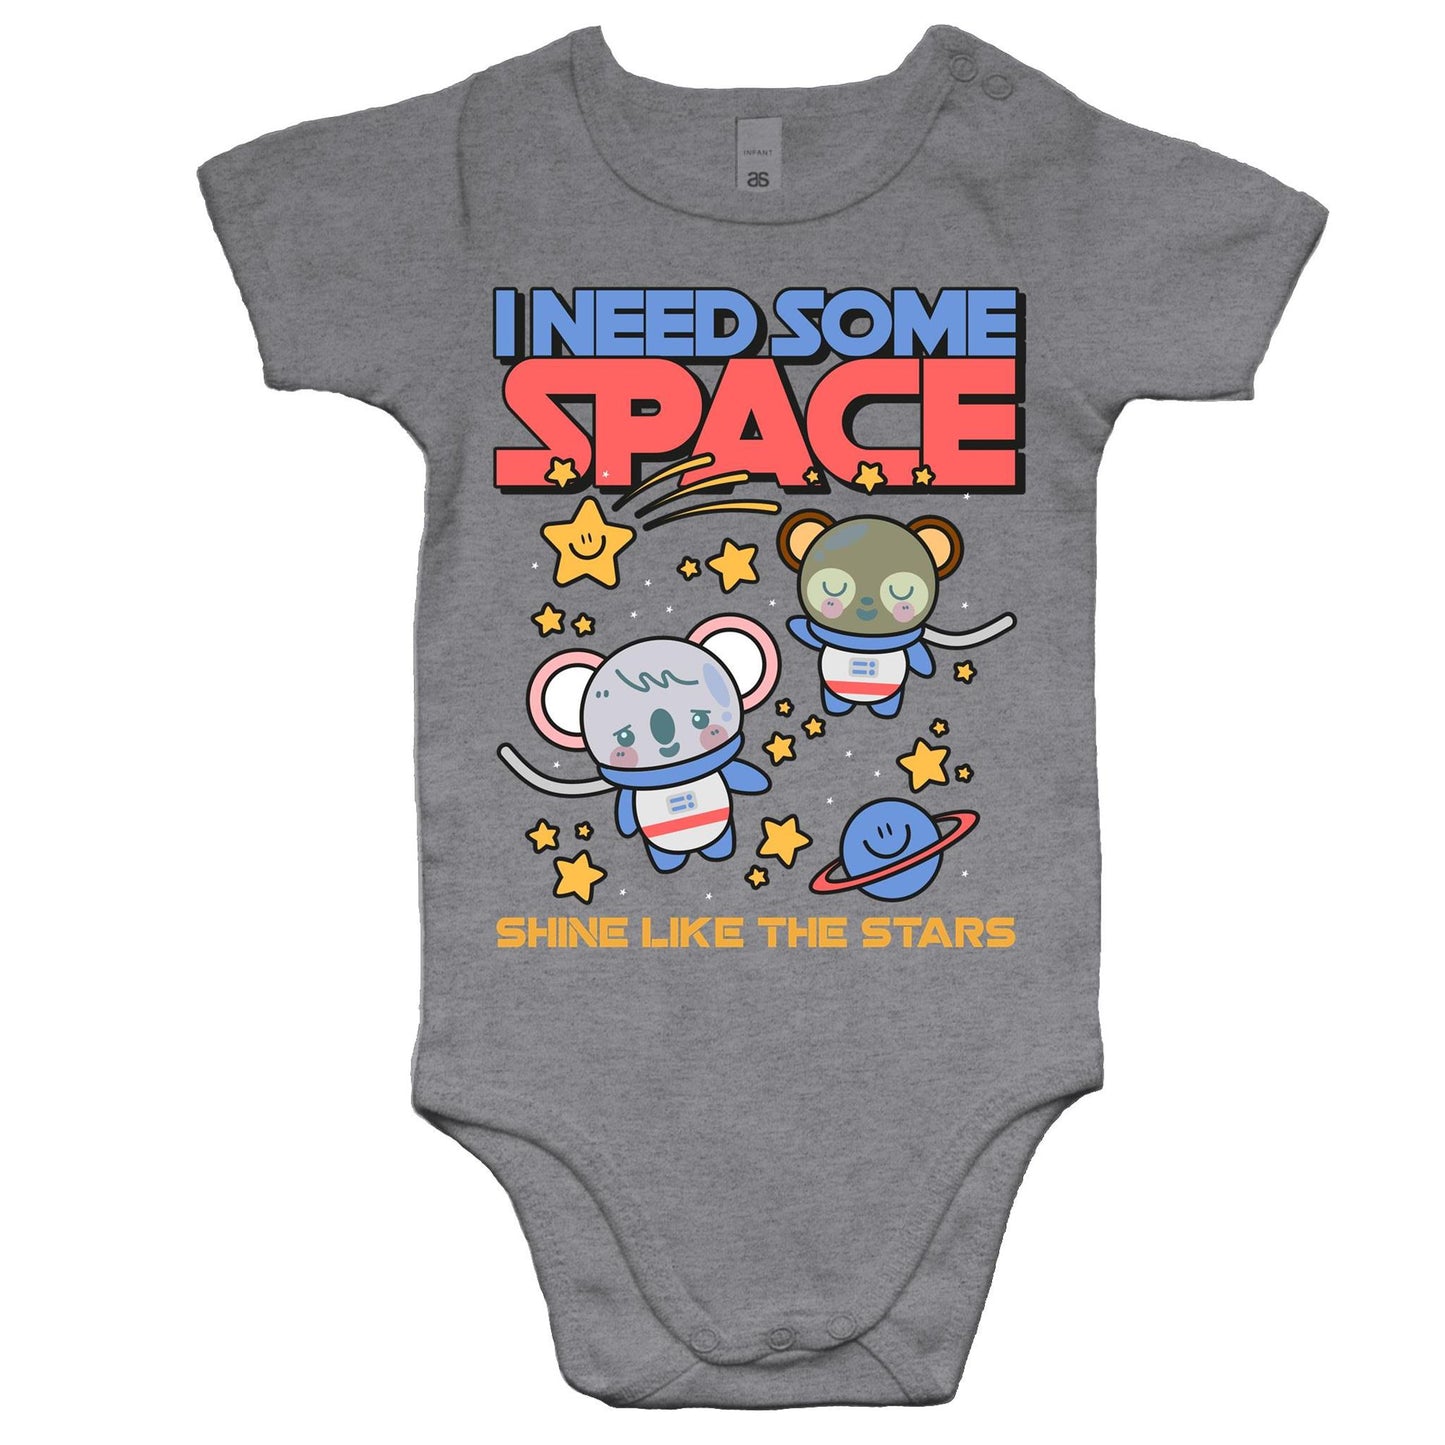 I Need Some Space - Baby Bodysuit Grey Marle Baby Bodysuit Space